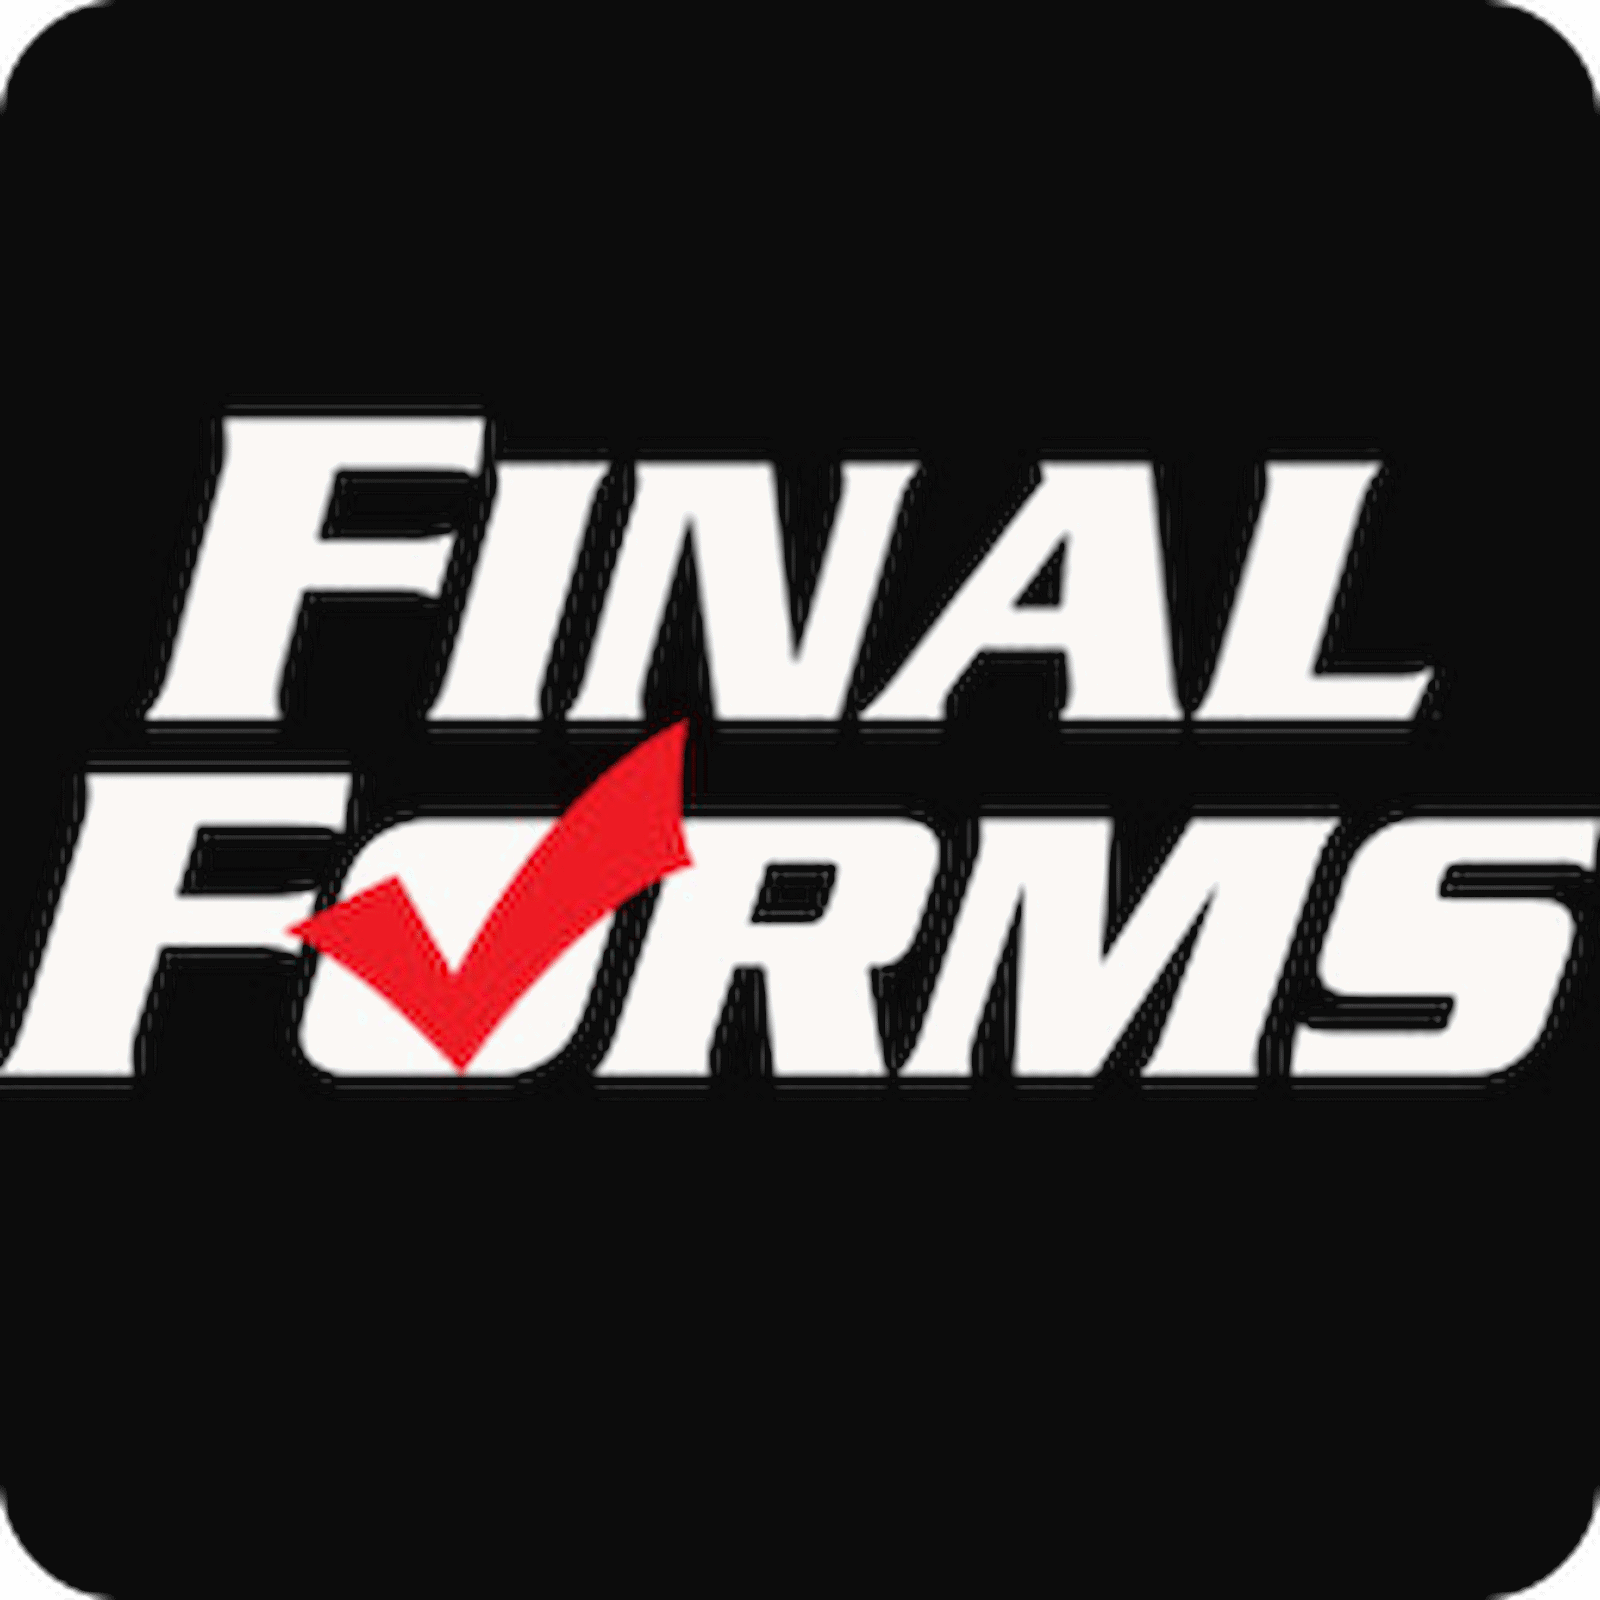 Final Forms (Athlete Paperwork) cover photo